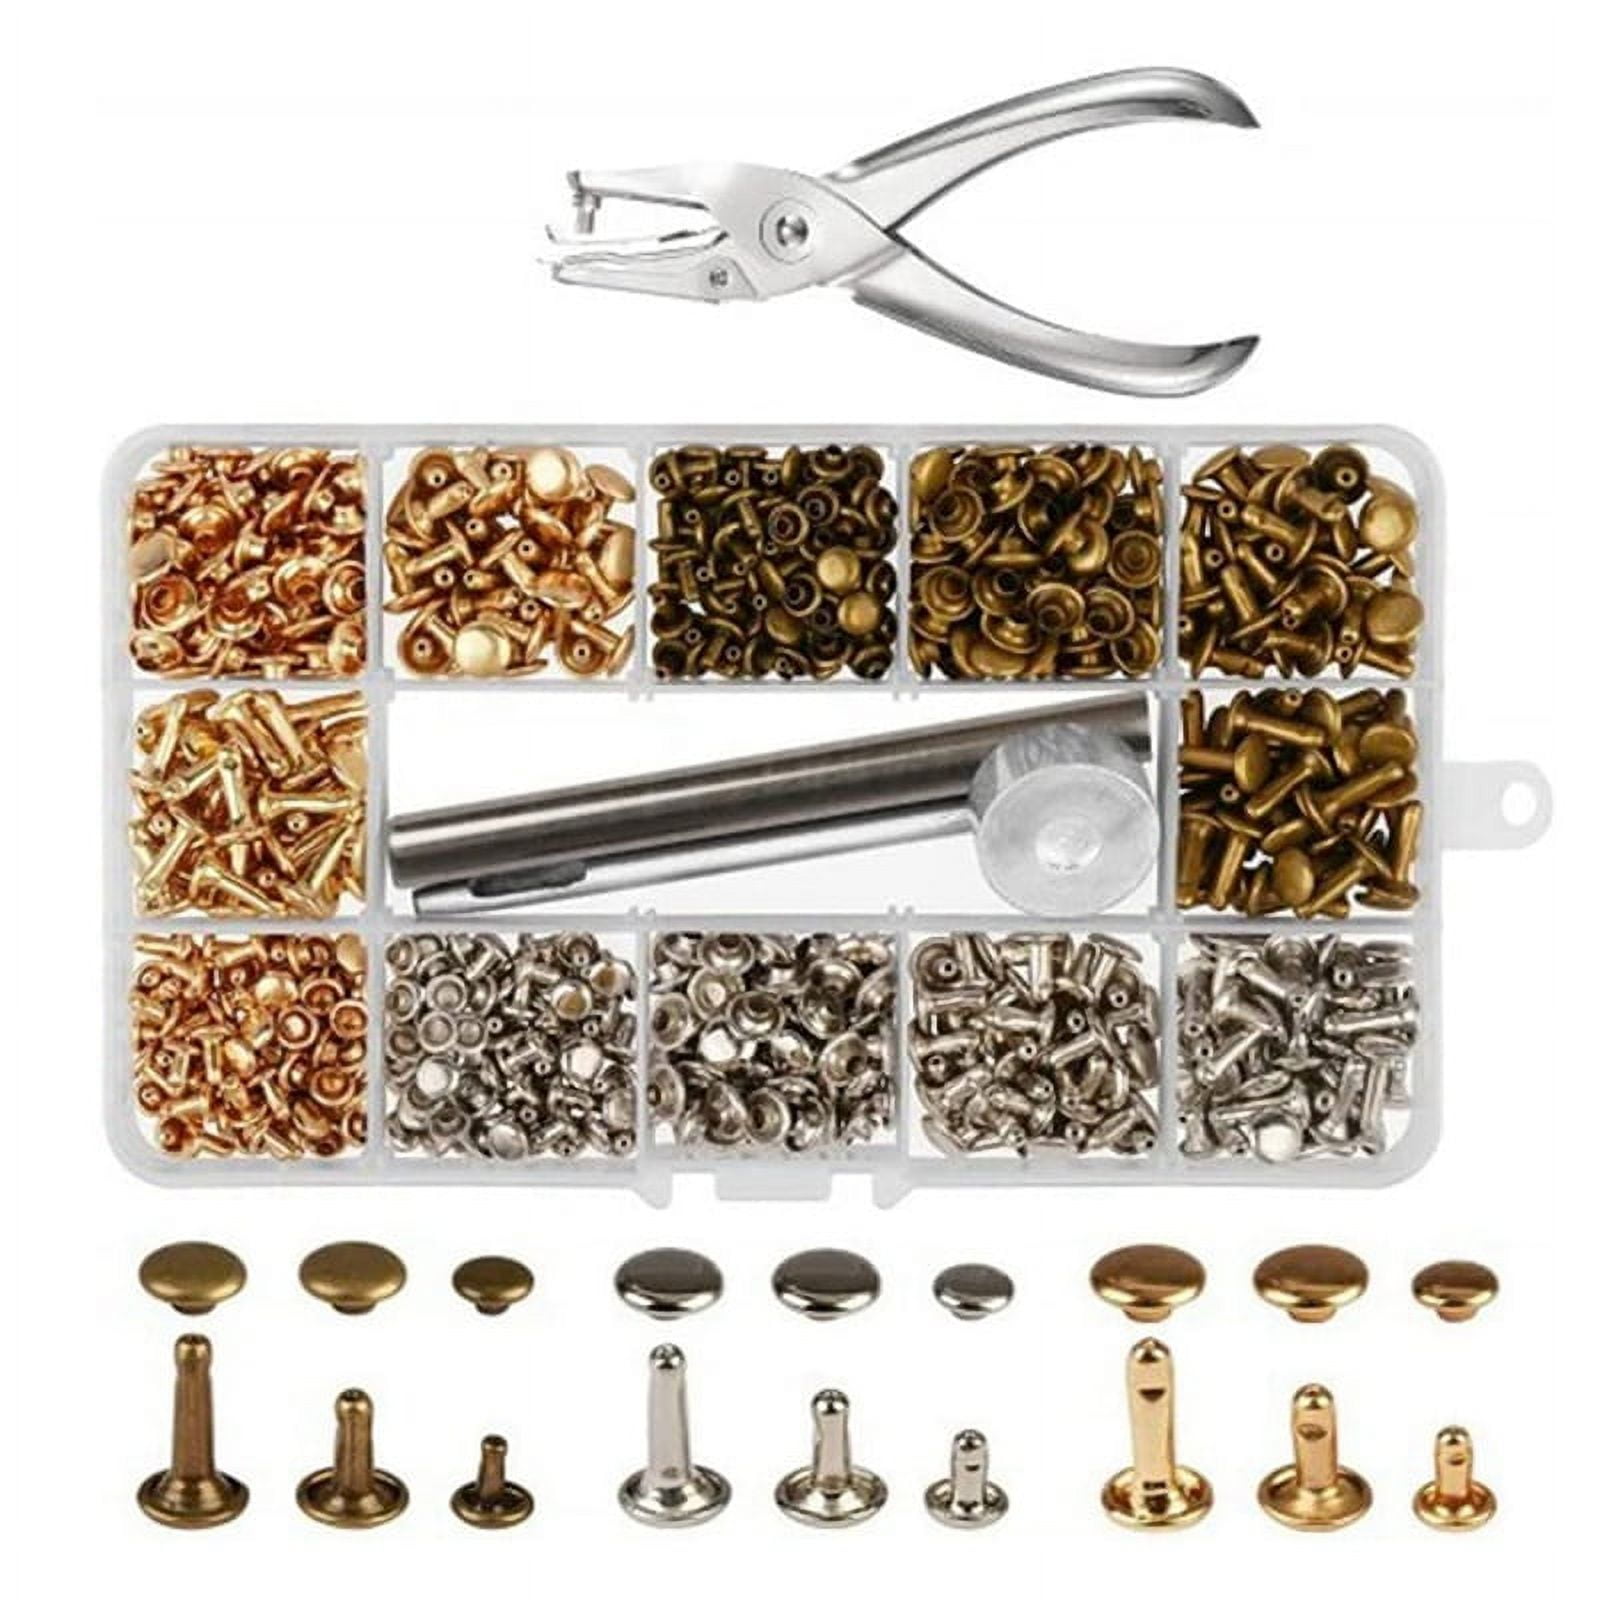 Leather Rivets Kit Double Cap Rivet Tubular 6/8mm Metal Cutting Tools Studs  Set With Fixing Tools For DIY Leather Craft Clothes From Household_artist,  $9.05